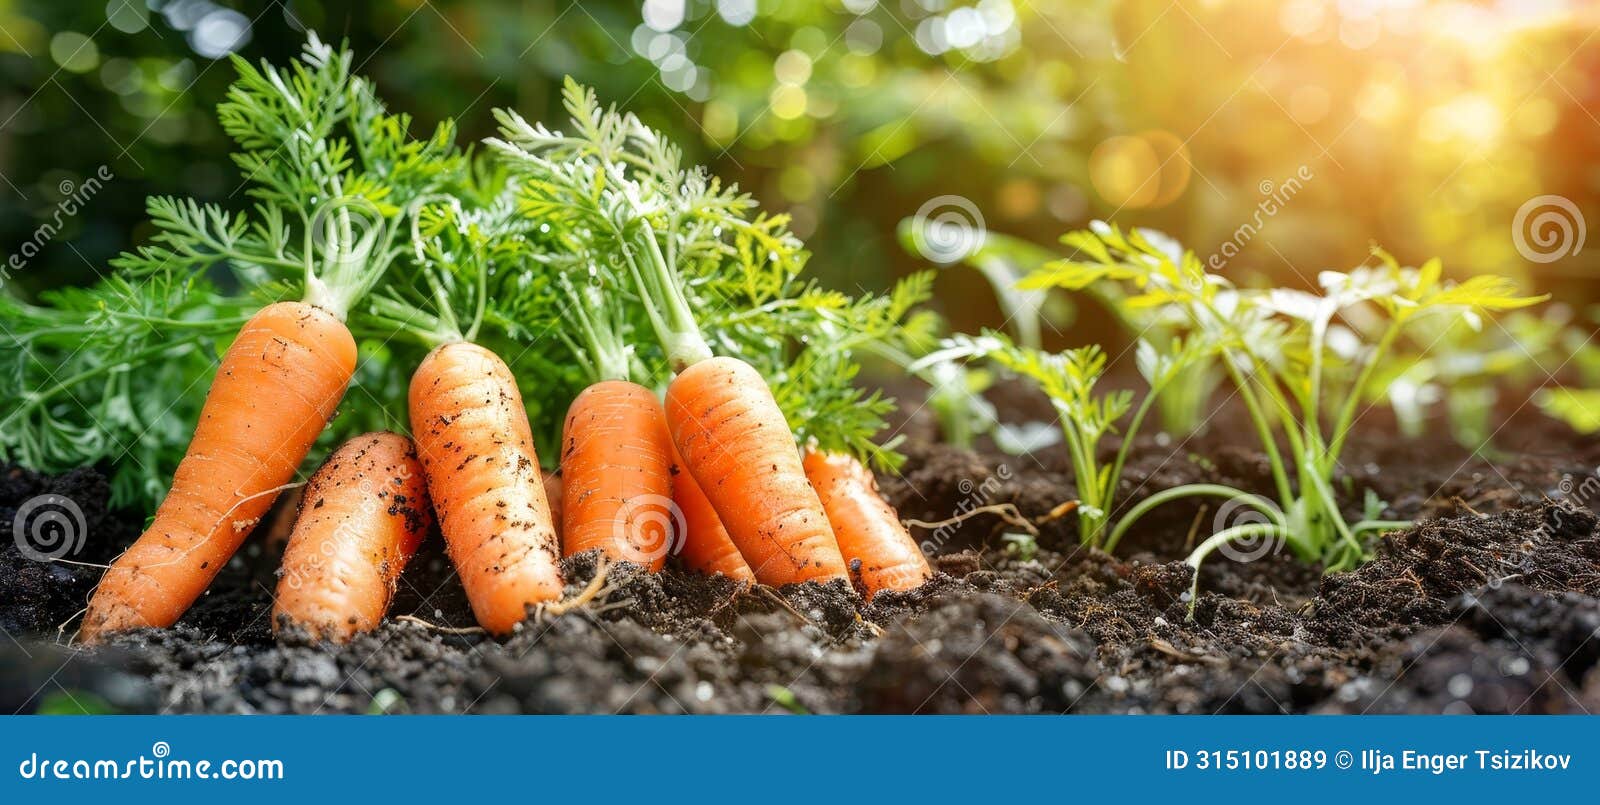 freshly harvested vibrant carrots thriving in a lush greenhouse garden environment